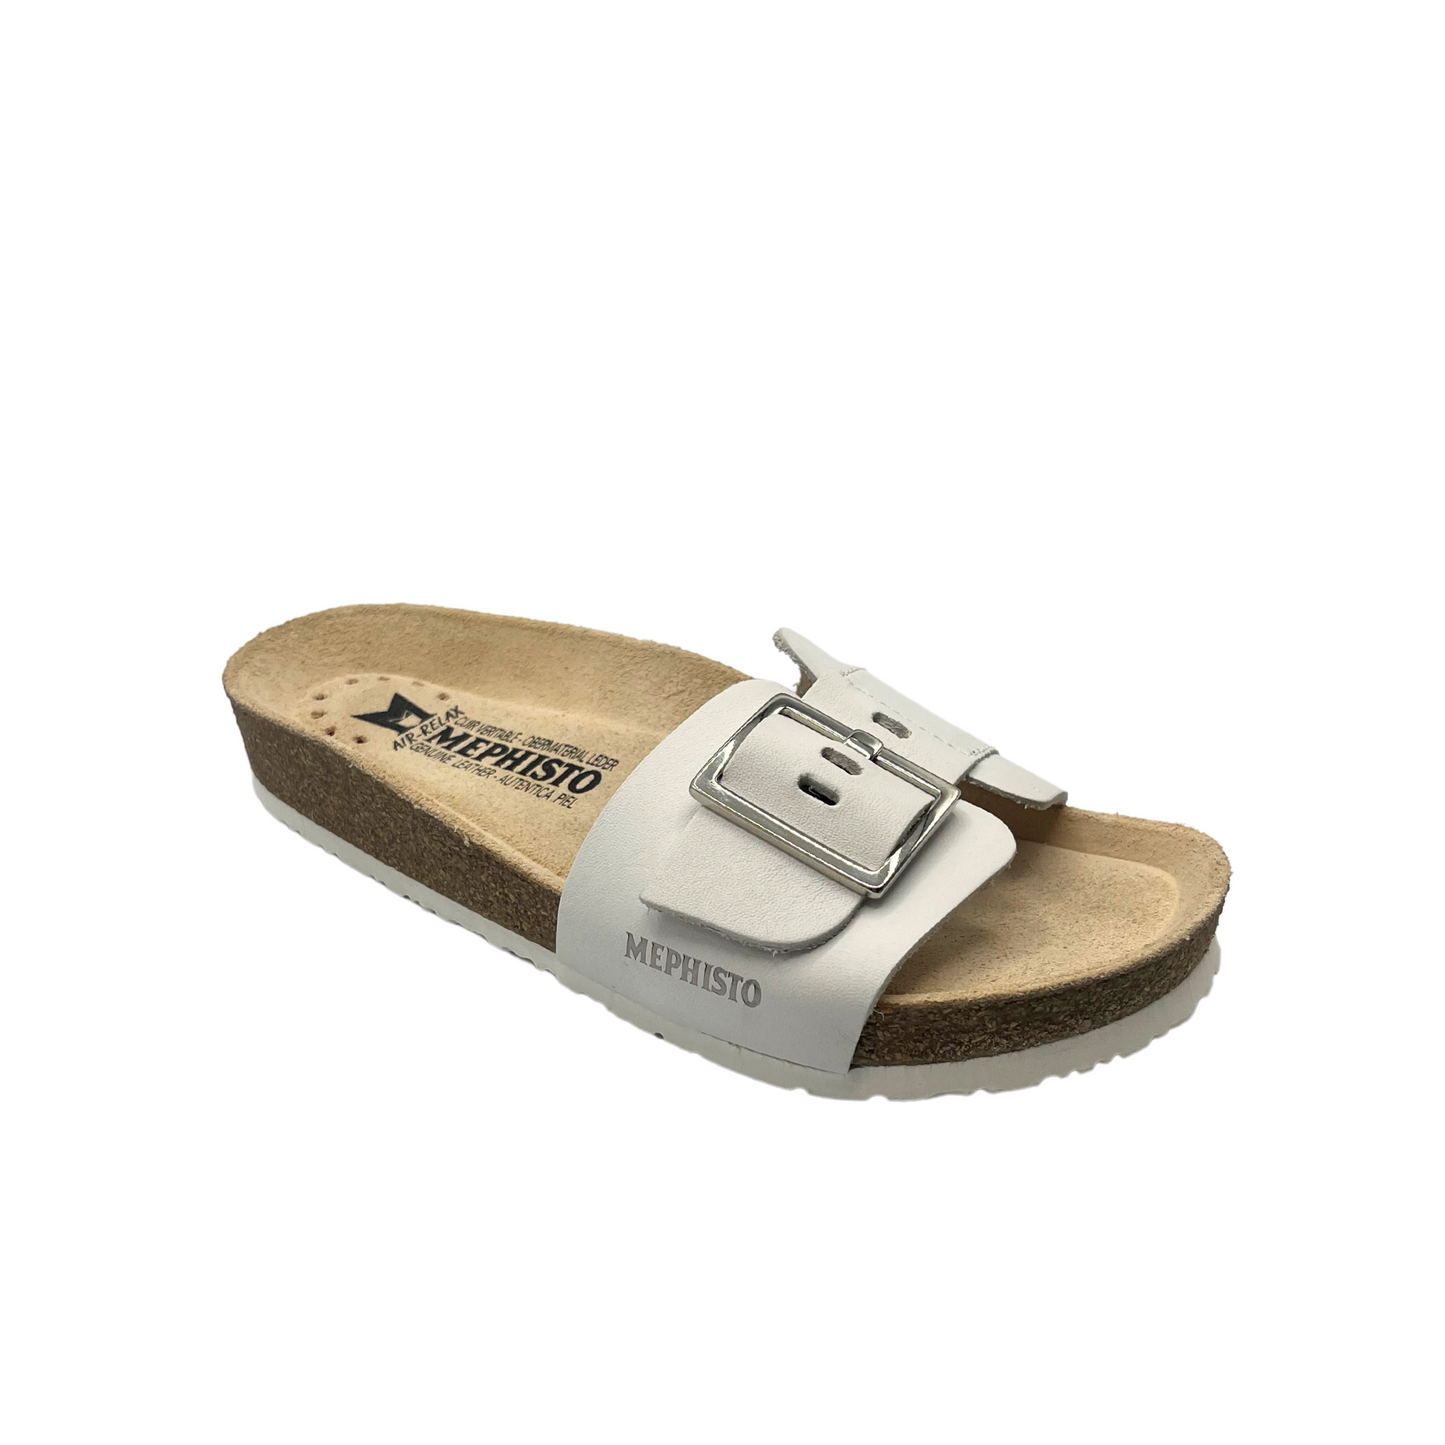 Angled front view of an ergonomic slip on sandal with one wide, adjustable  strap at forefoot.  Shown in white